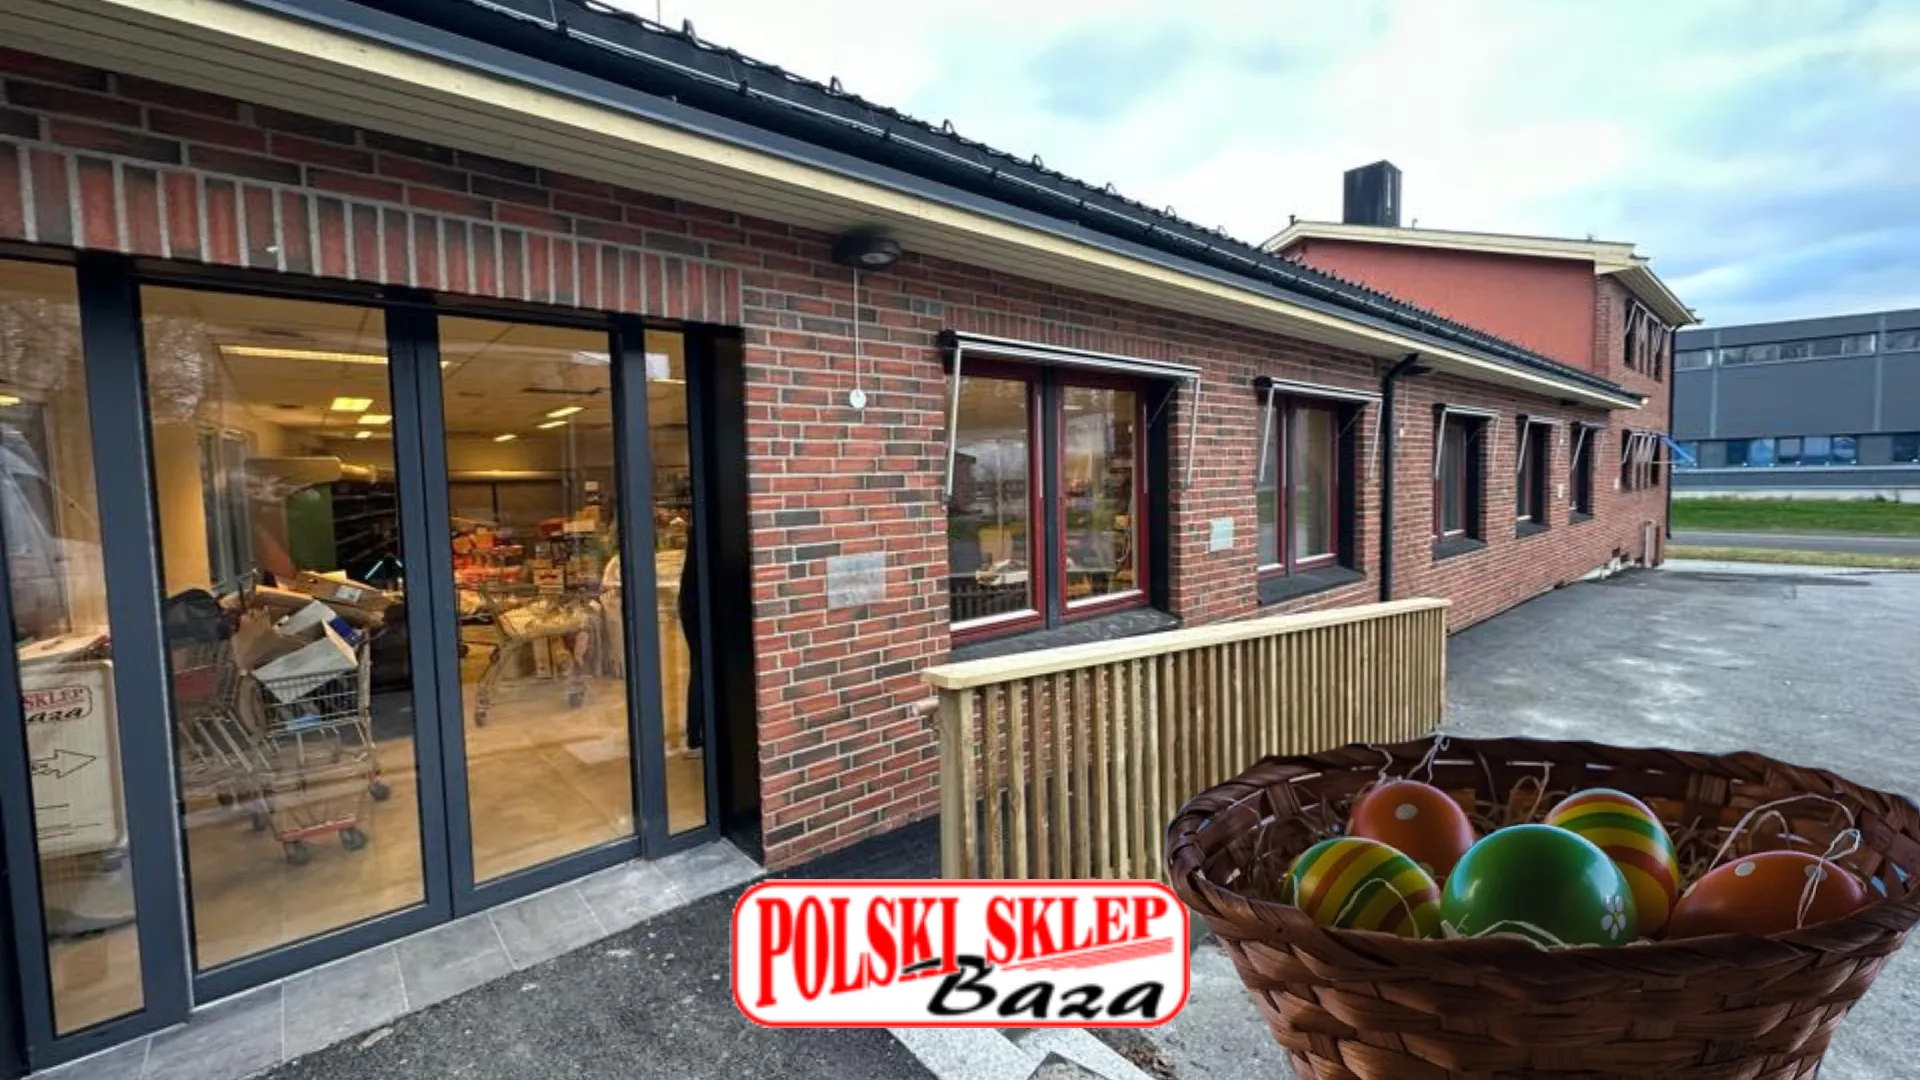 Norway - How are the shops open on public holidays? Polish store Baza-Offer of groceries in Oslo and Drammen